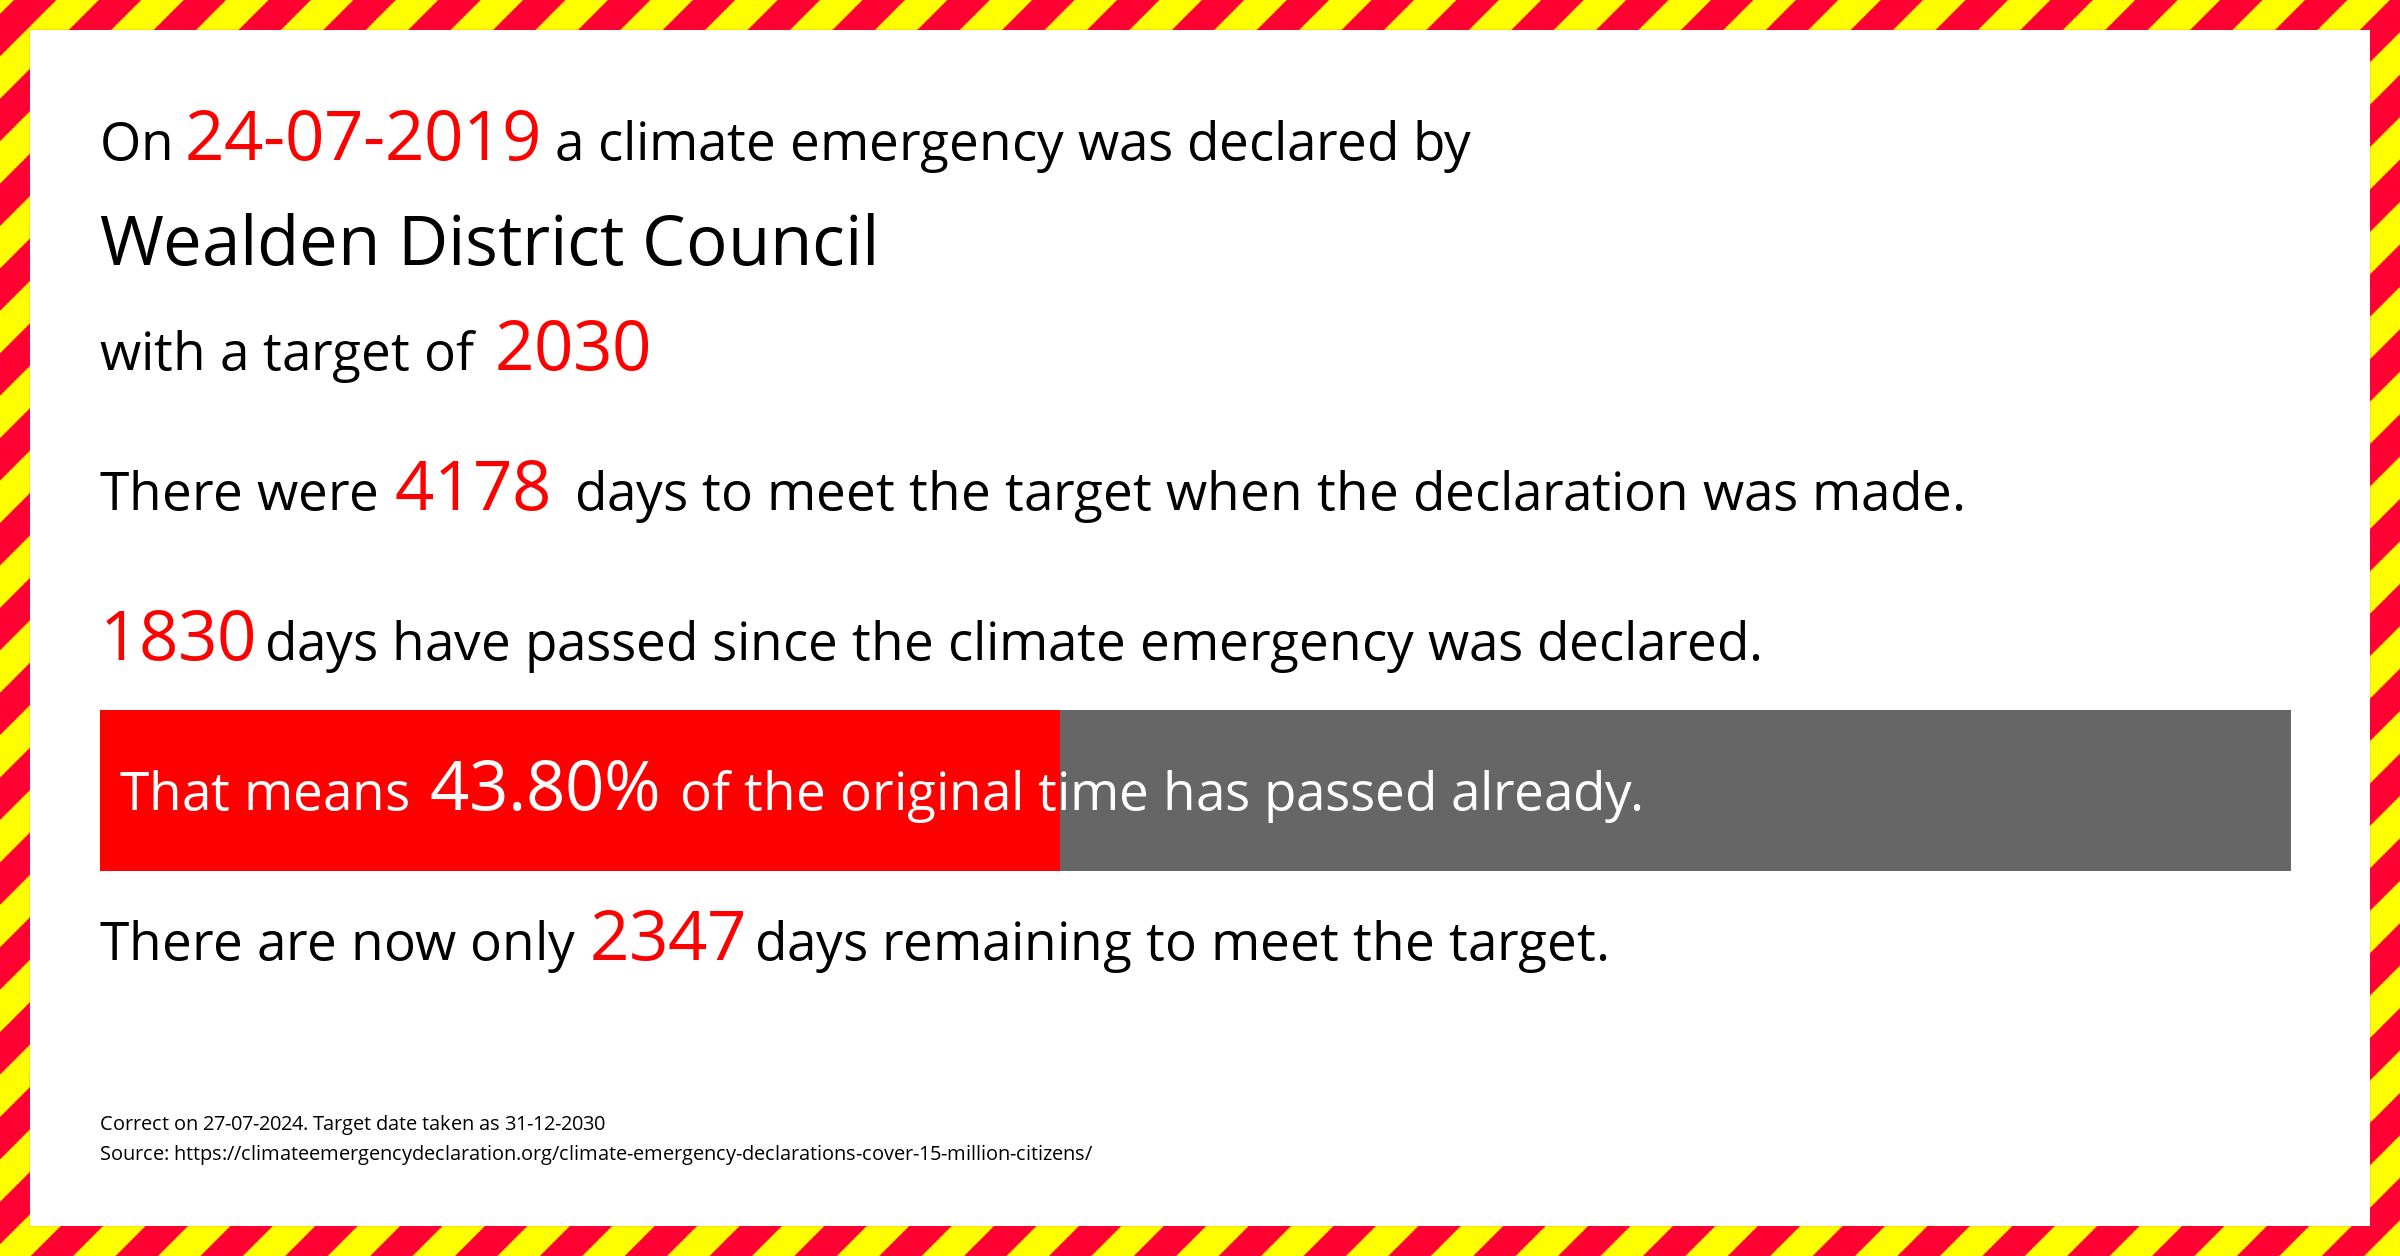 Wealden District Council declared a Climate emergency on Wednesday 24th July 2019, with a target of 2030.